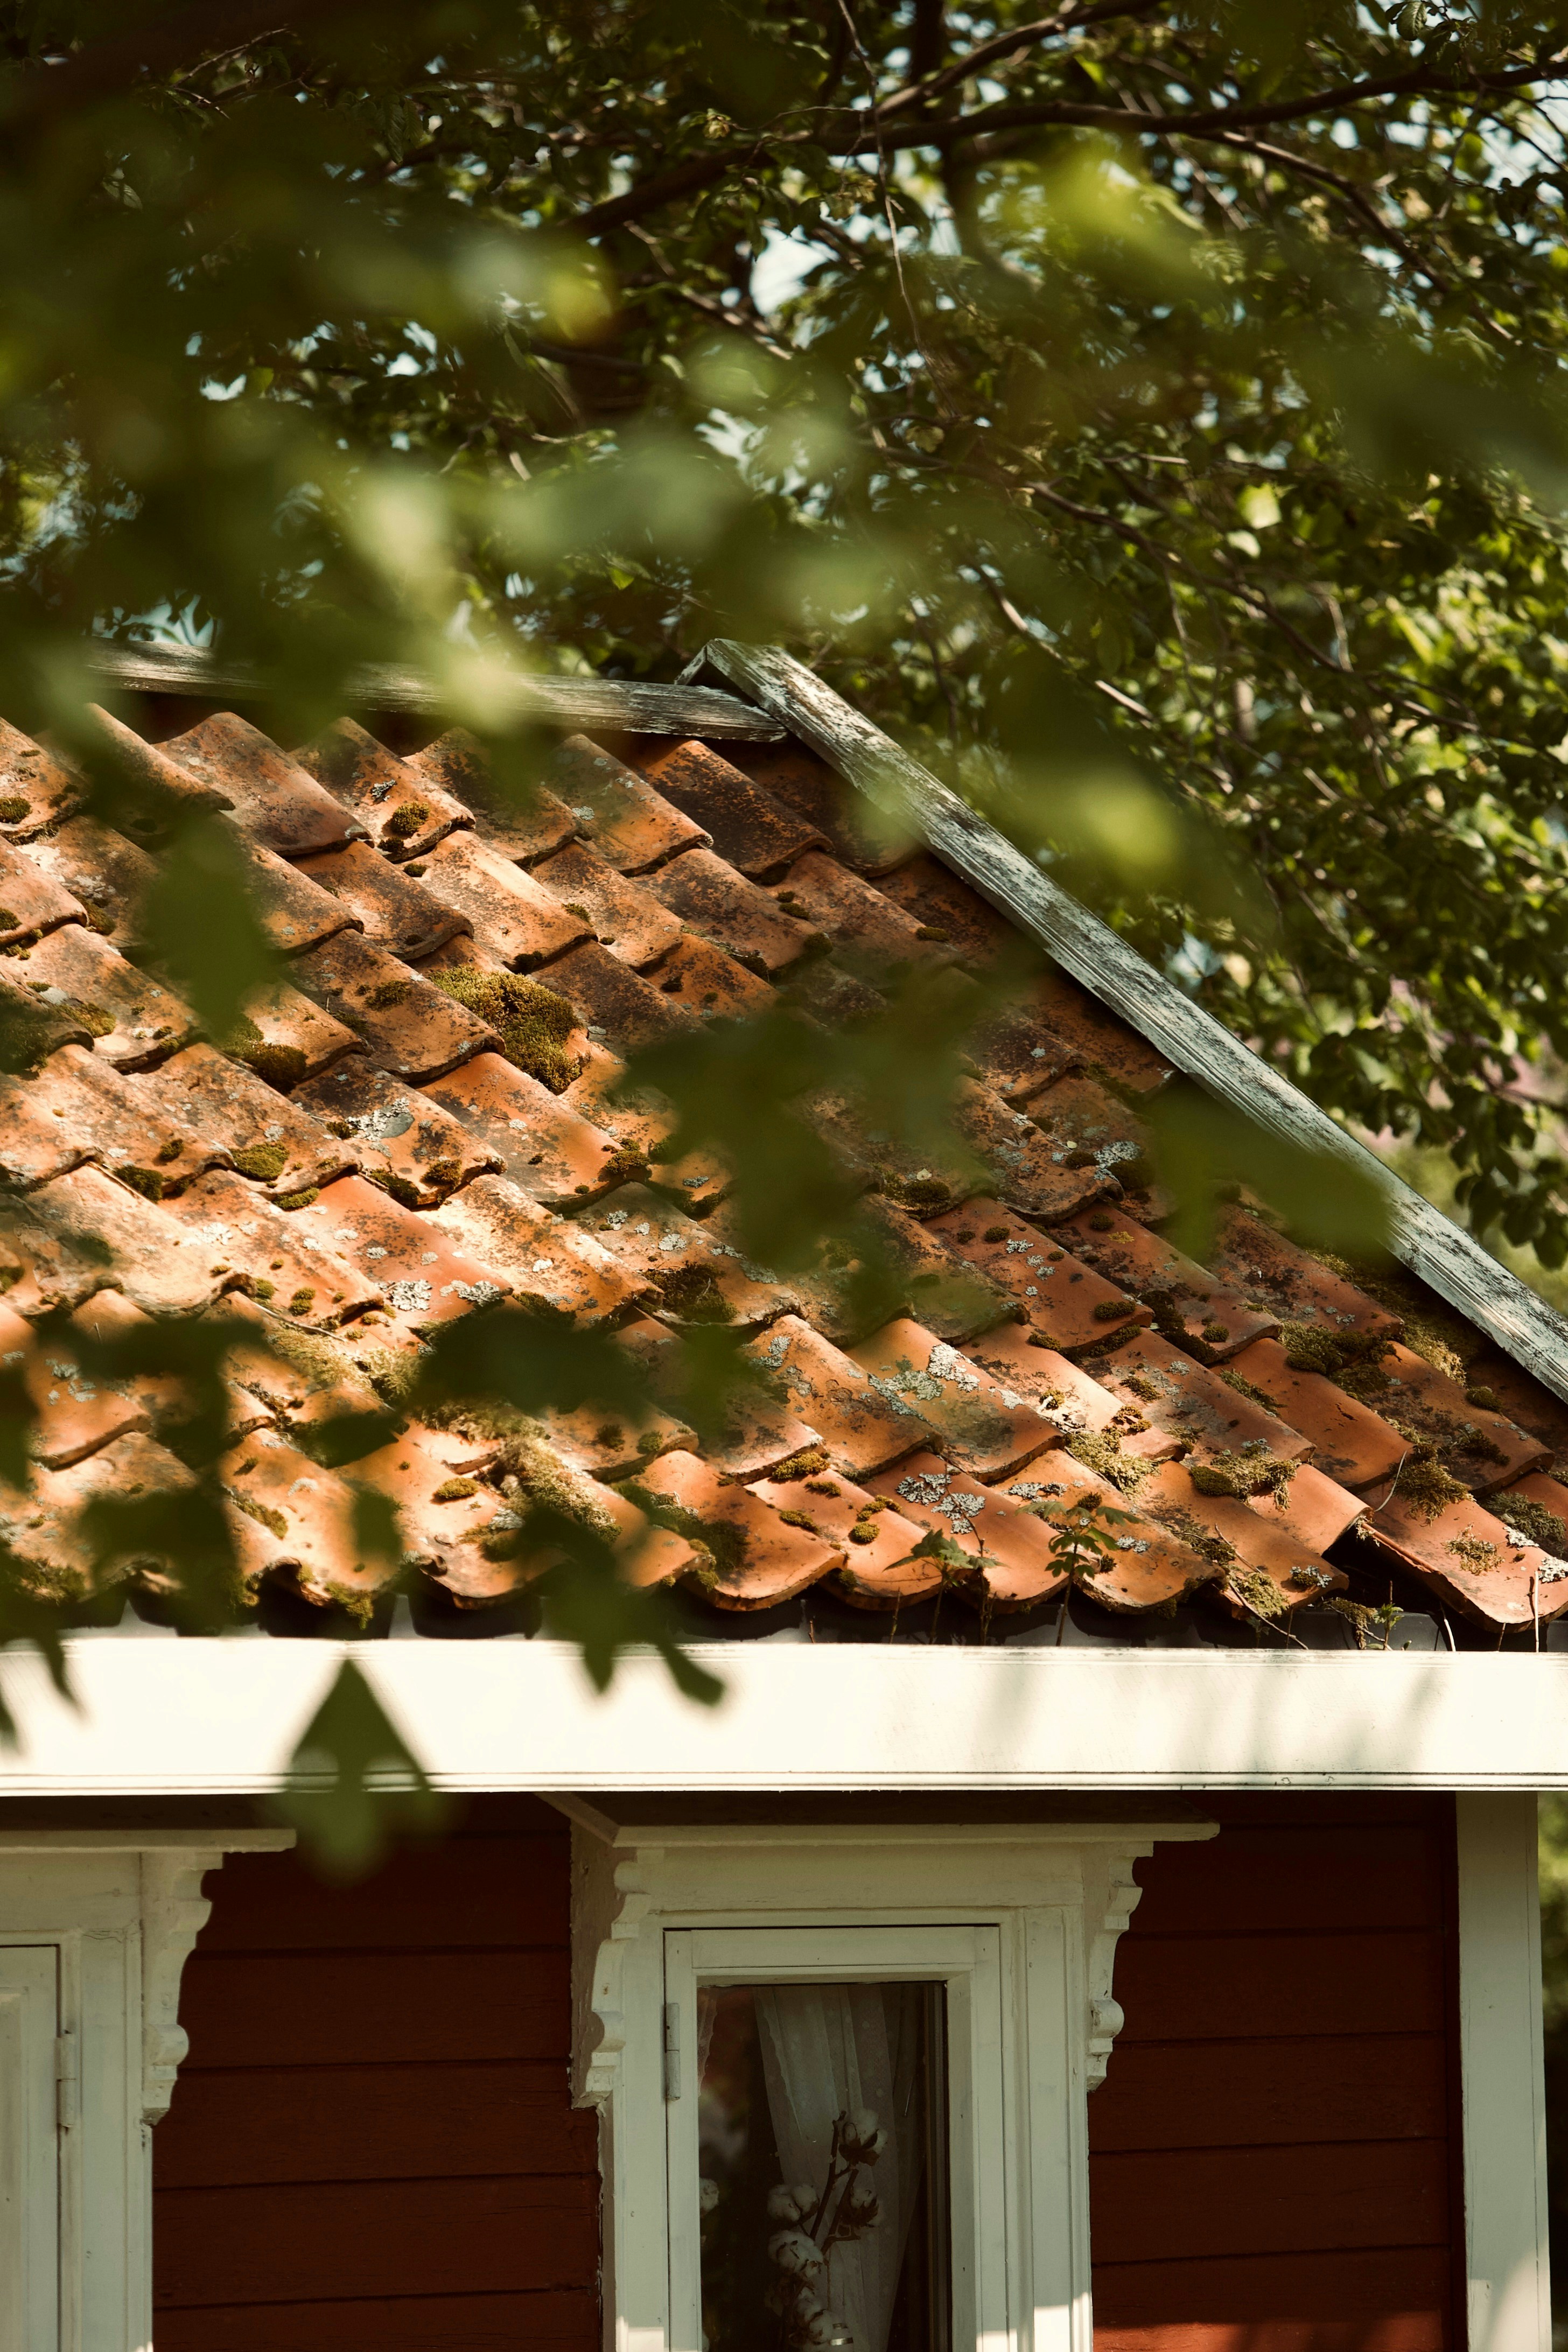 Roof filled with light brown stone tiles